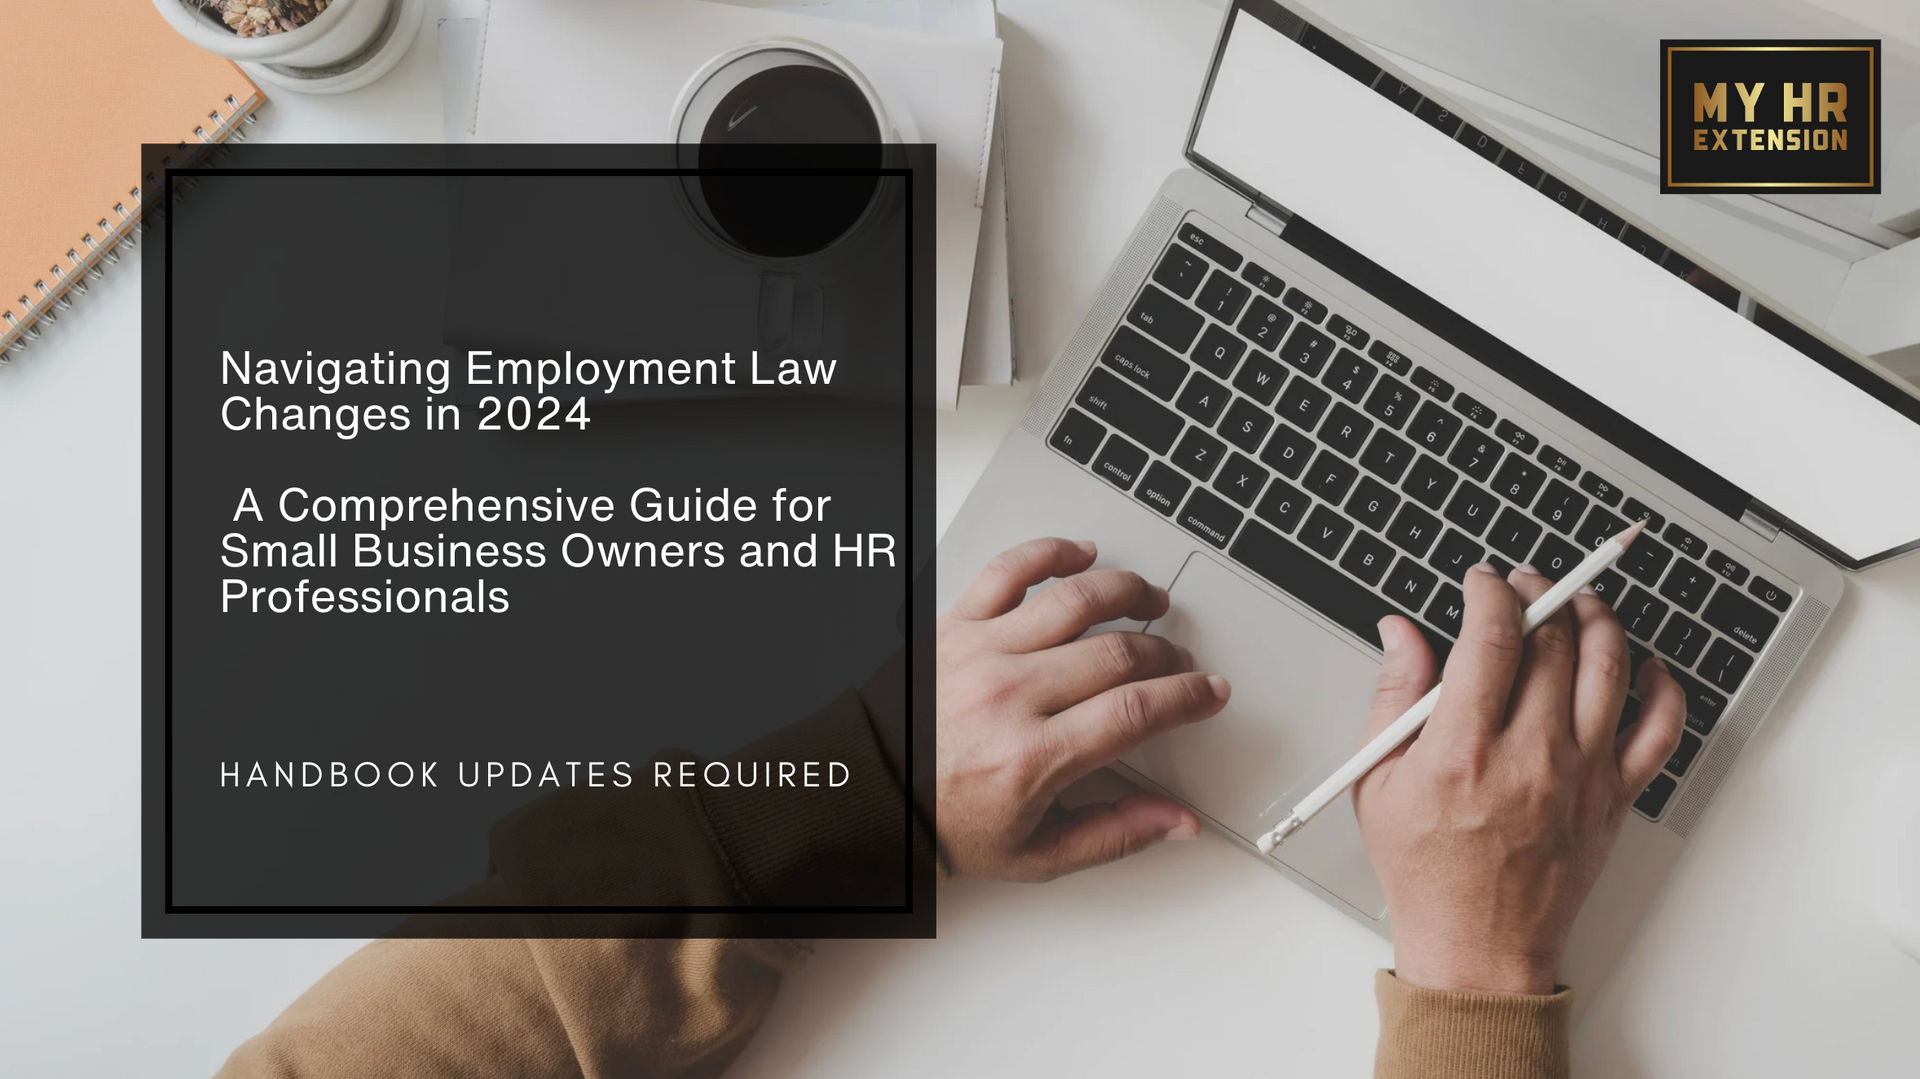 Navigating Employment Law Changes in 2024: A Comprehensive Guide for Small Business Owners and HR Professionals